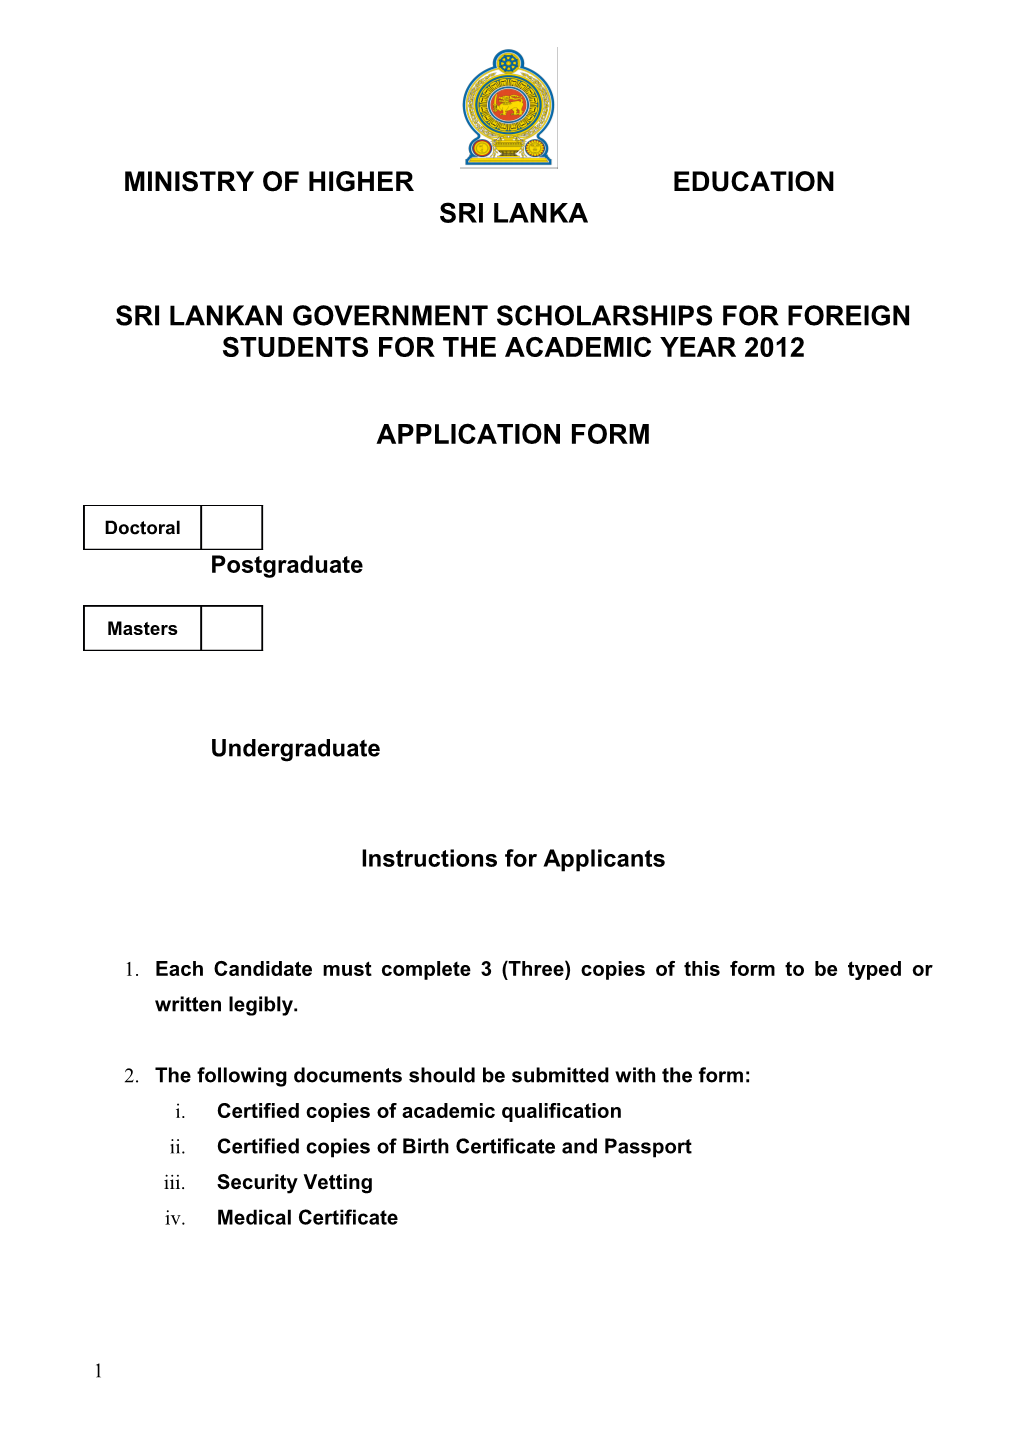 Sri Lankan Government Scholarships for Foreign Students for the Academic Year 2012